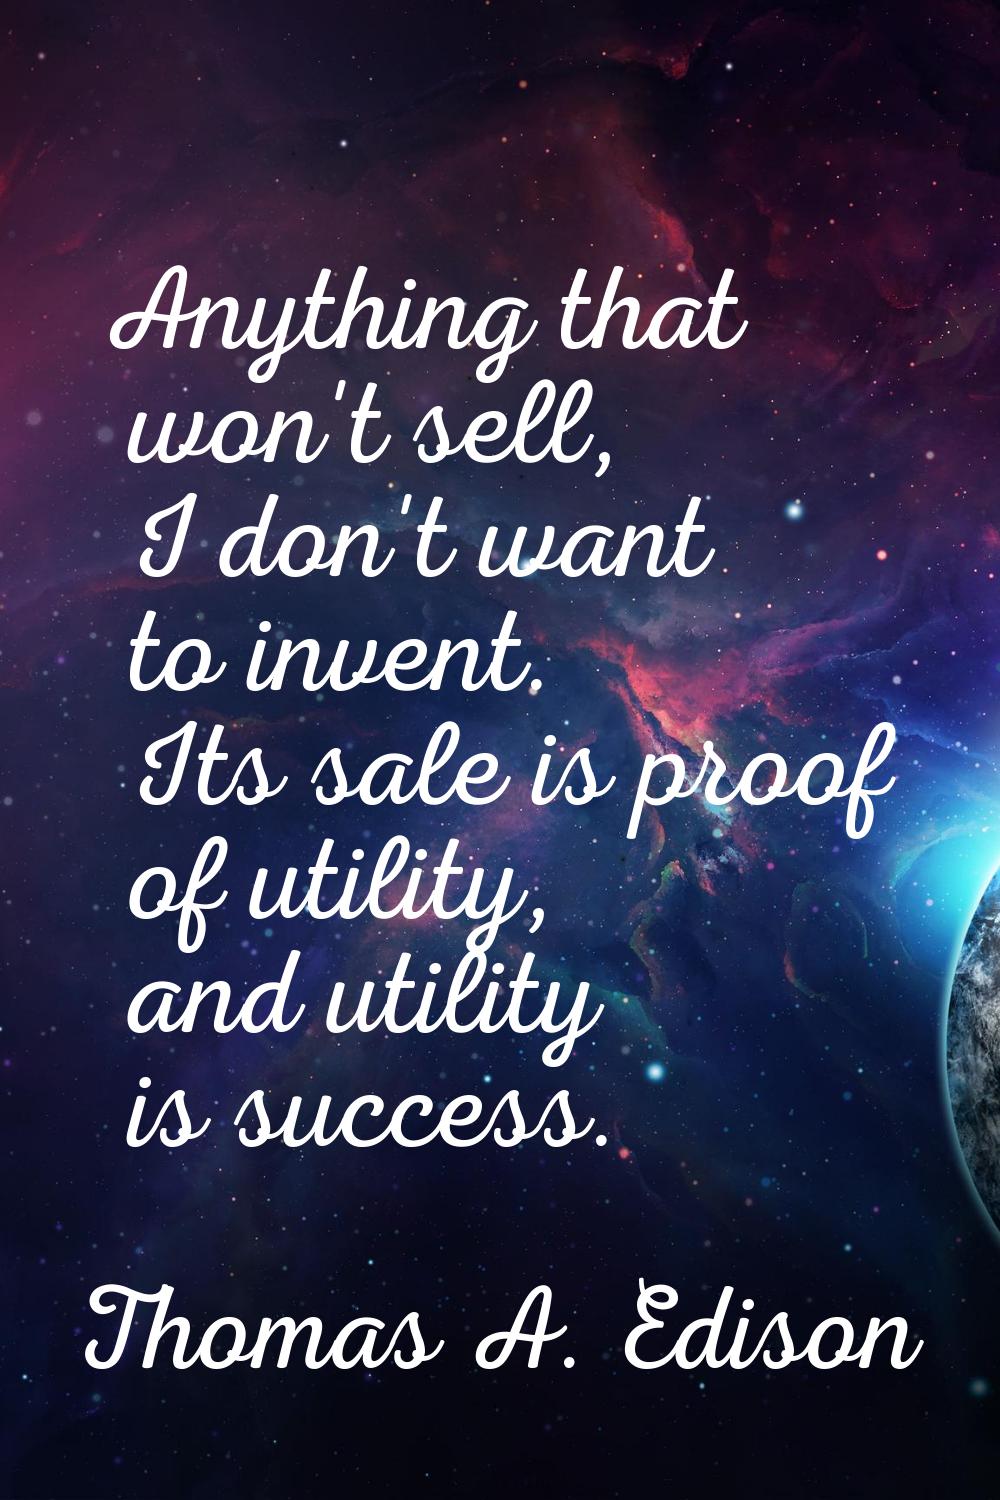 Anything that won't sell, I don't want to invent. Its sale is proof of utility, and utility is succ